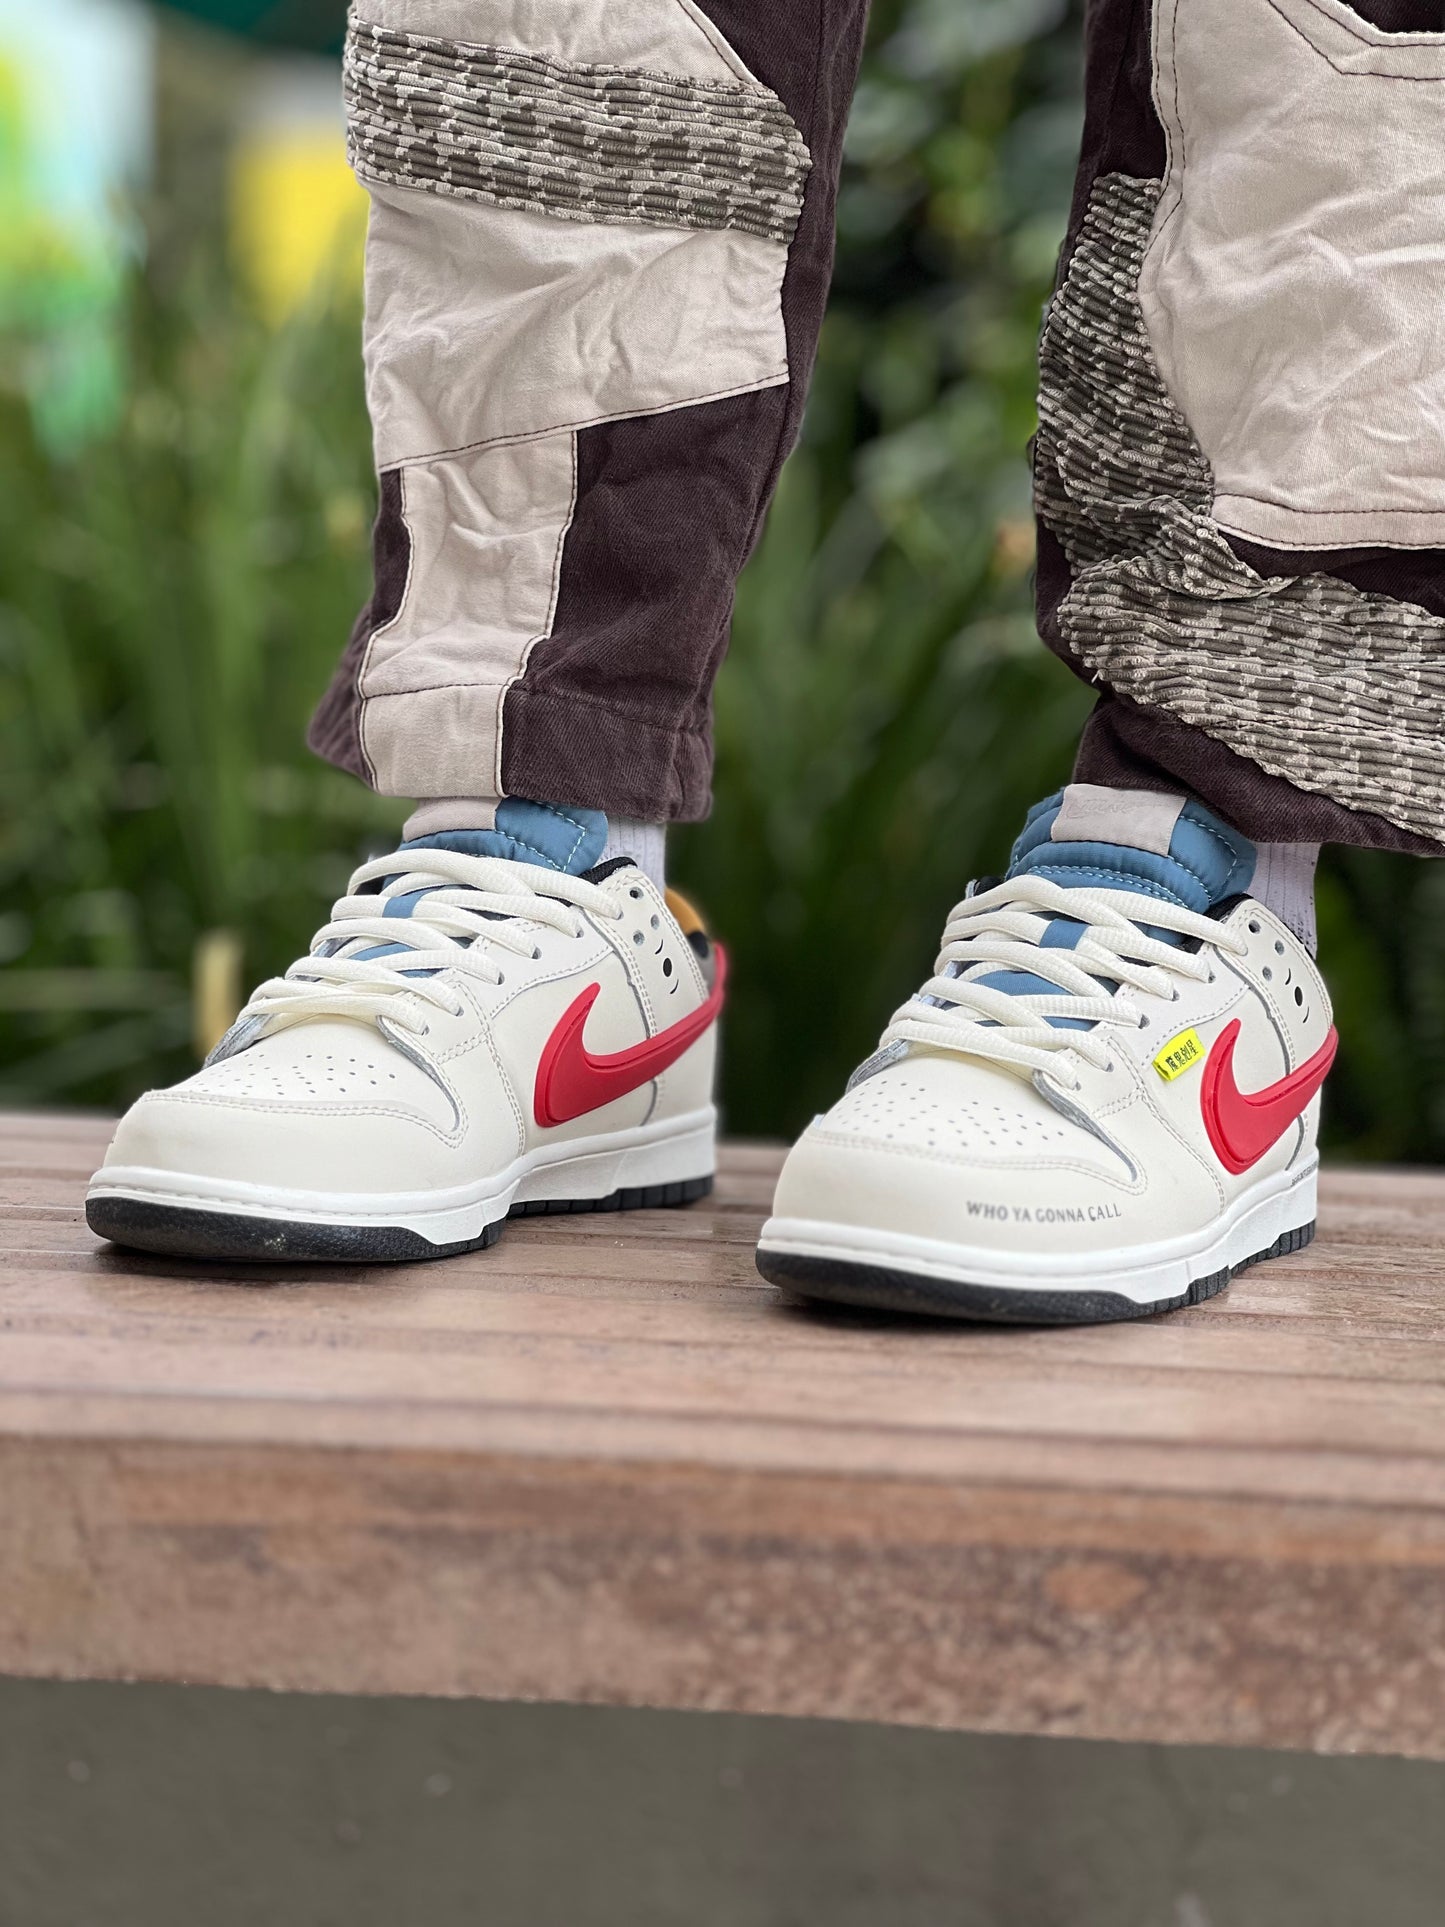 Nike Dunk Low x Ghostbusters